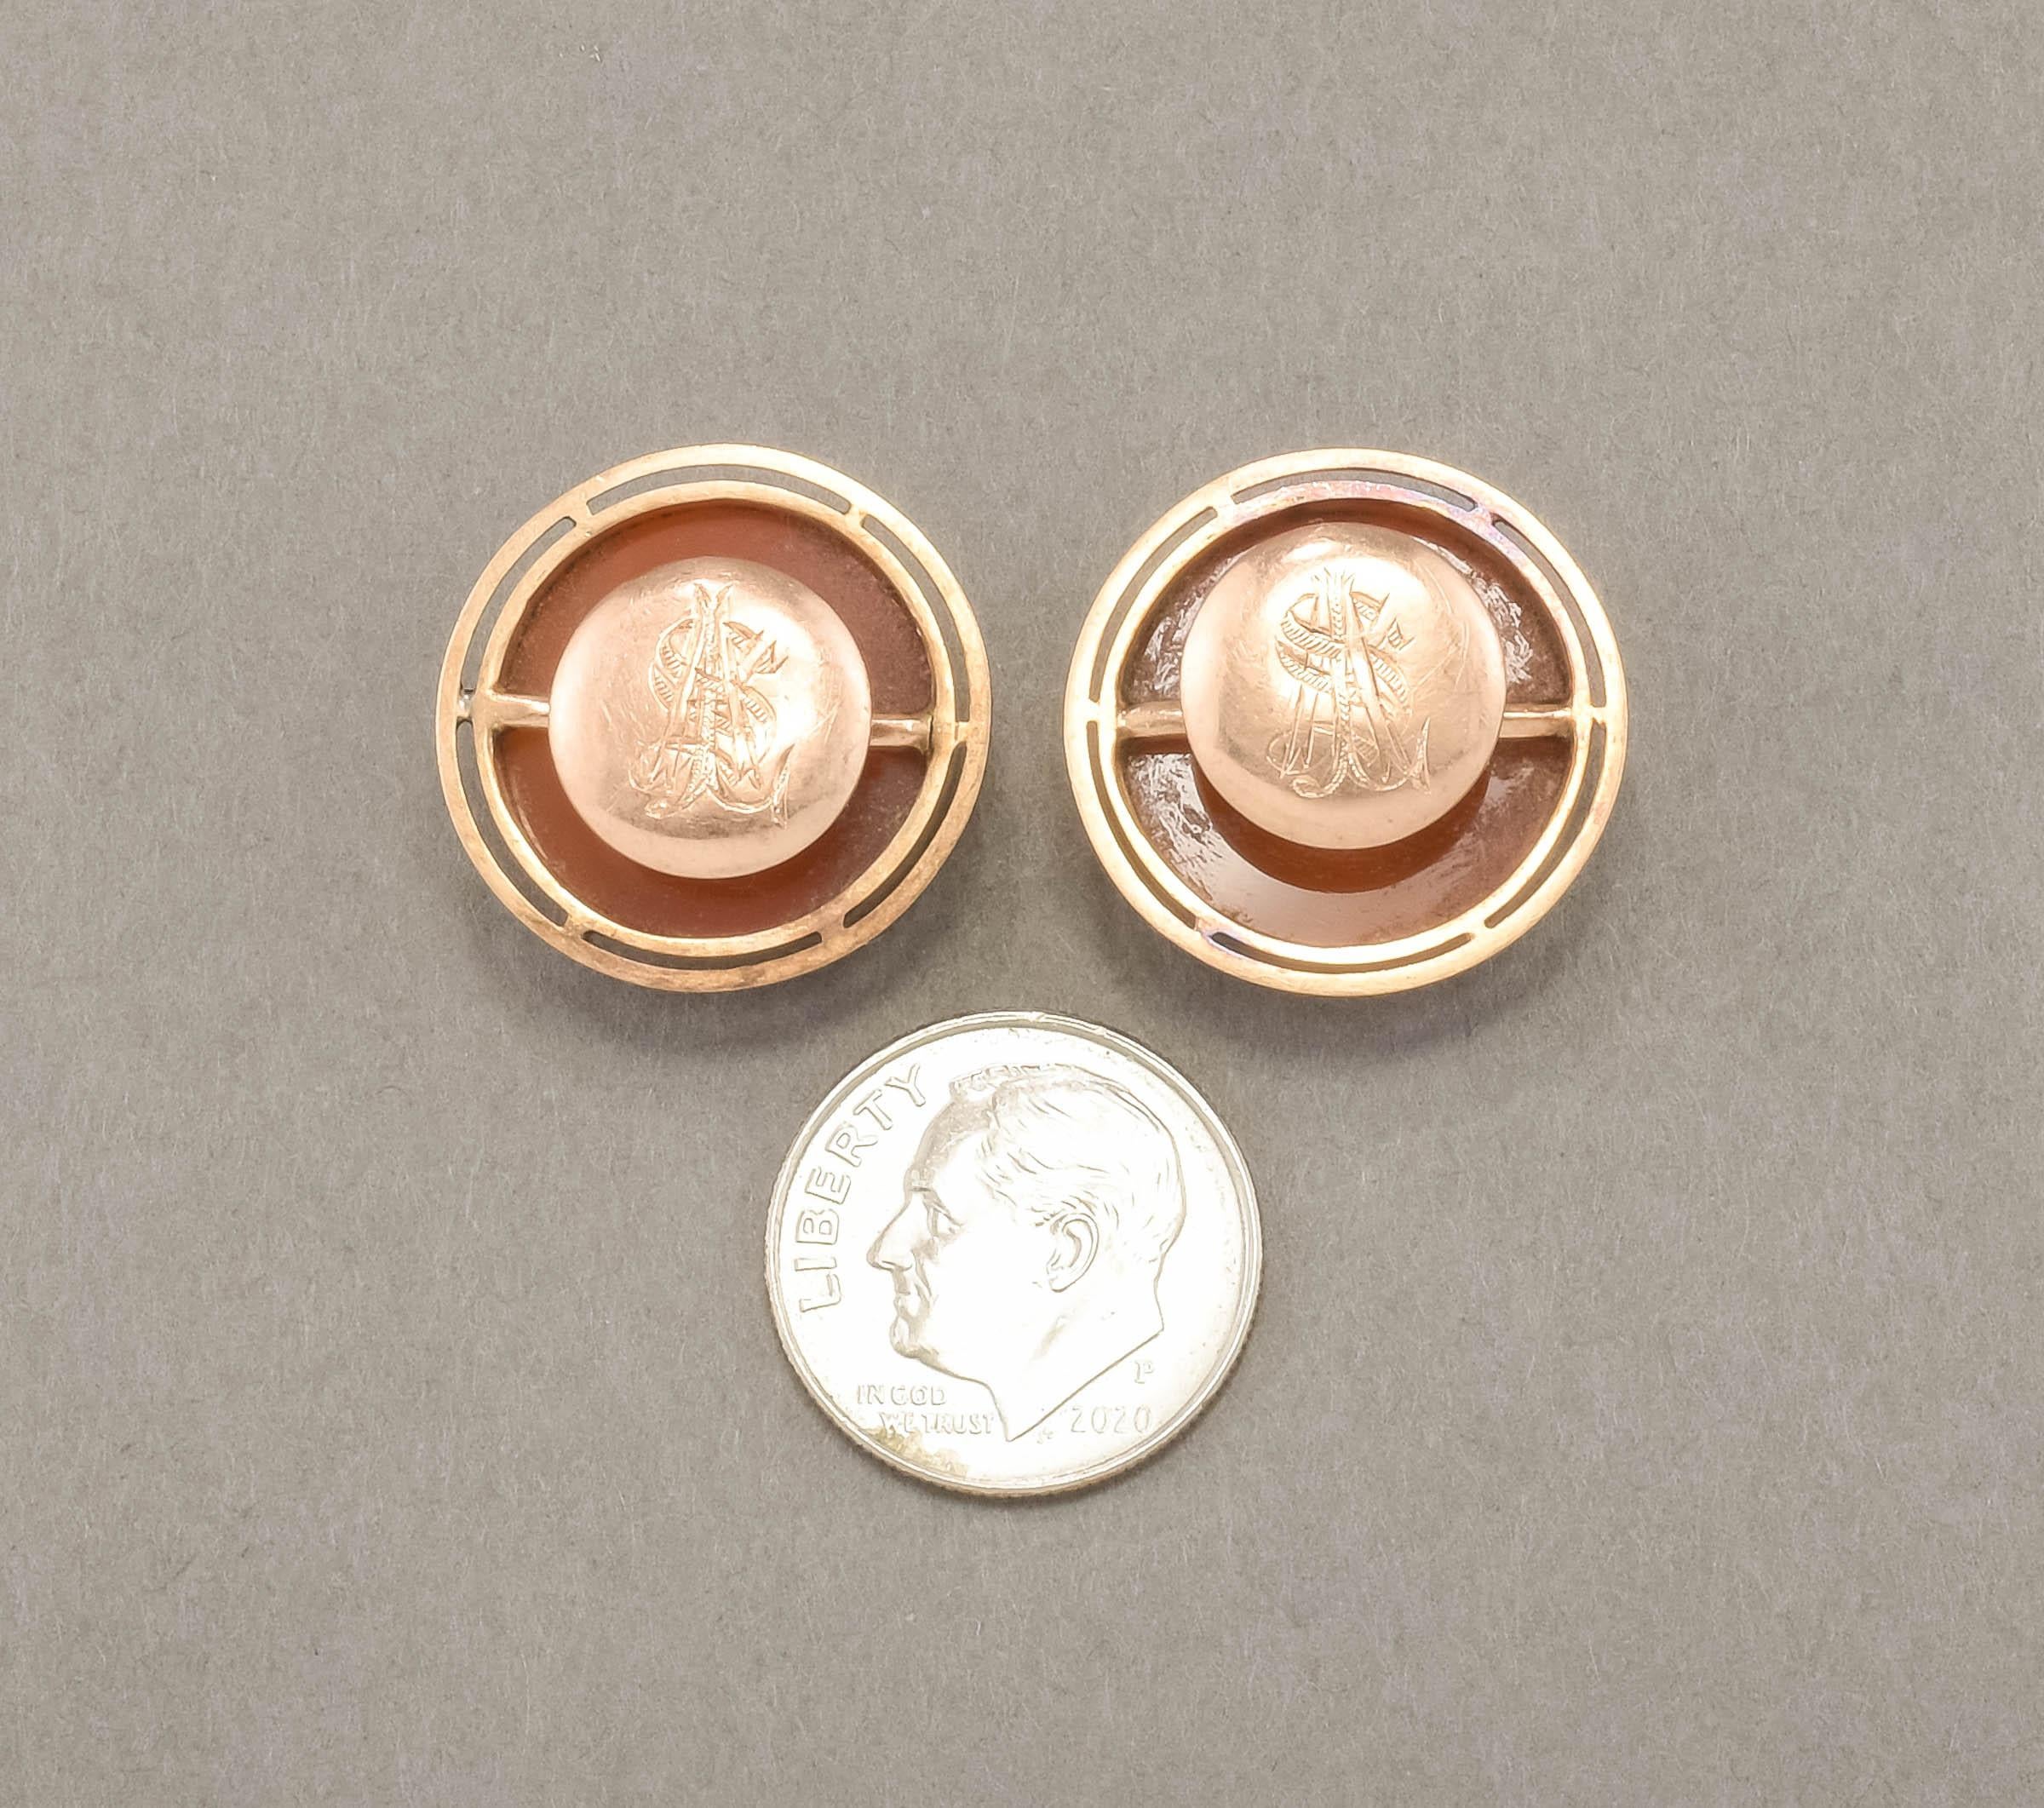 Victorian Antique Banded Agate Cameo Cufflinks or Buttons in 14K Gold with Monogram For Sale